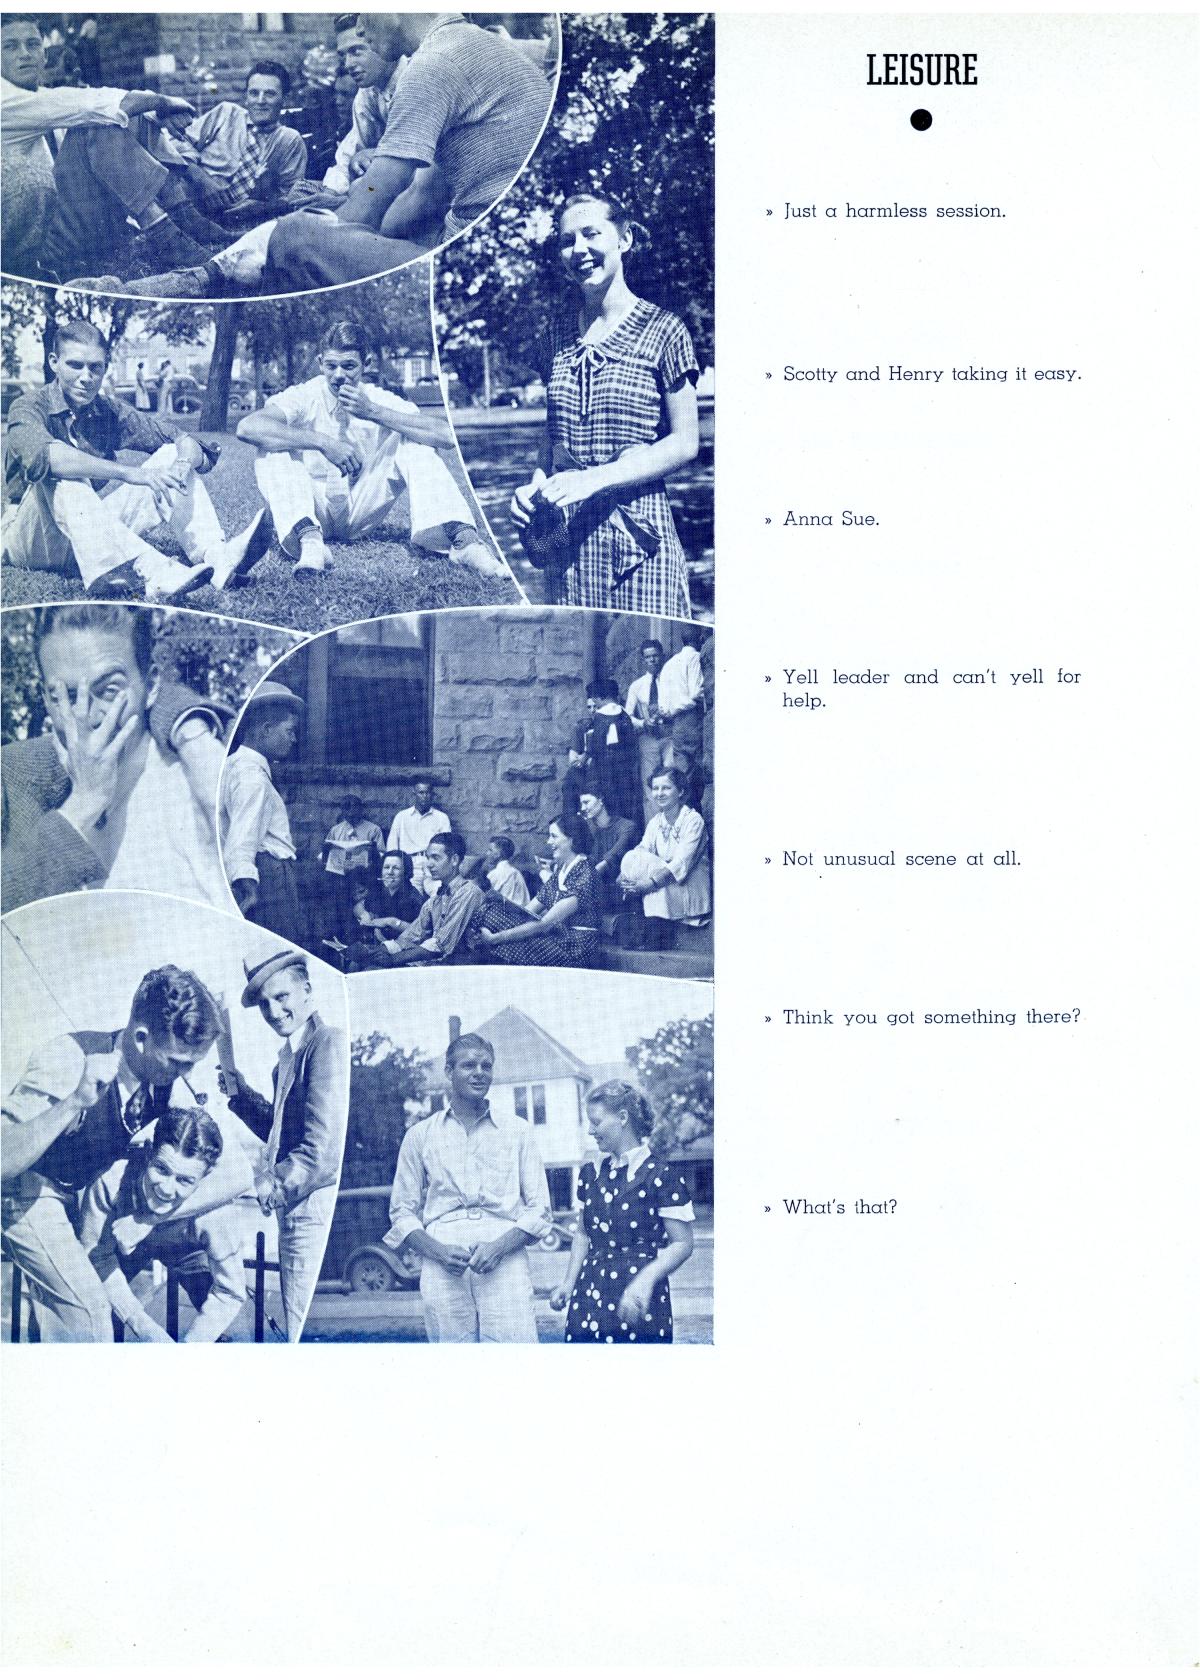 The Lasso, Yearbook of Howard Payne College, 1937
                                                
                                                    91
                                                